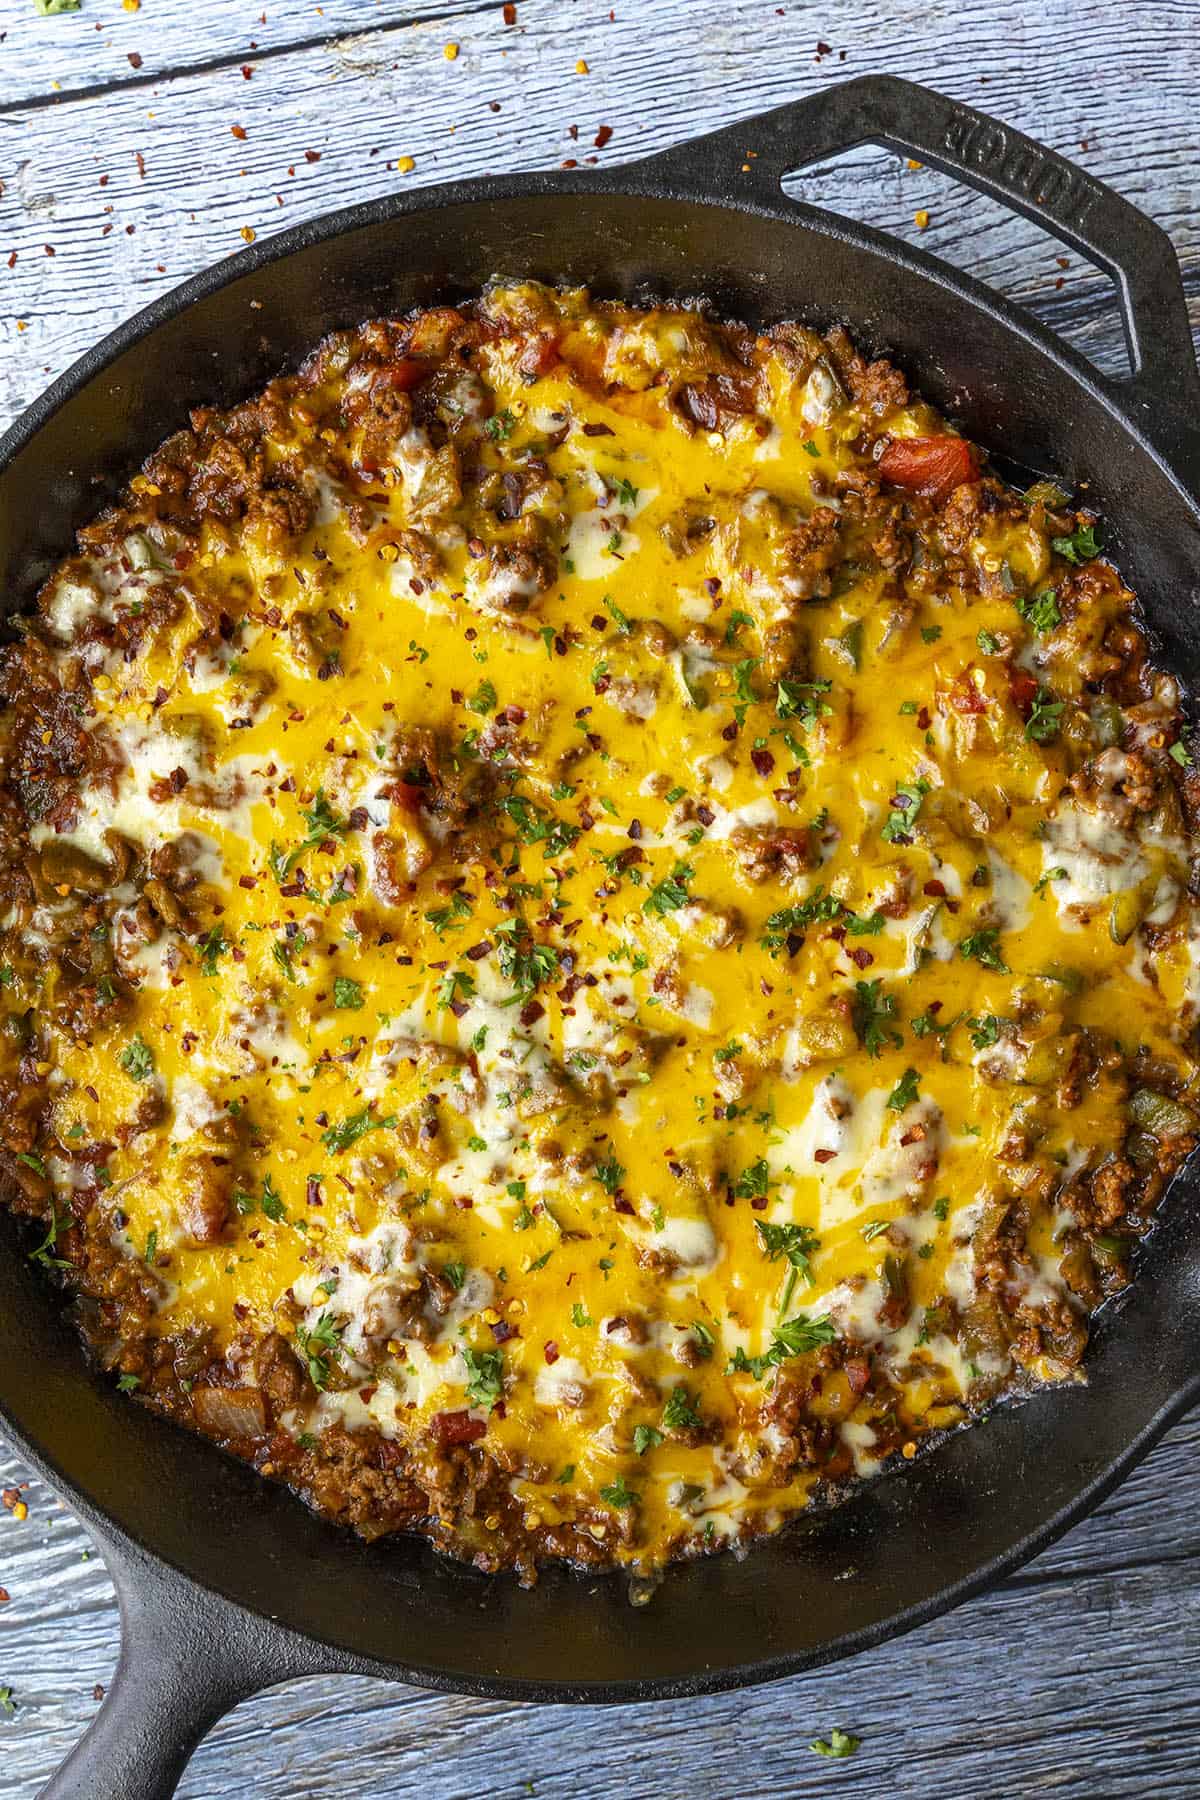 Hatch Chili Cheese Dip in a hot pan